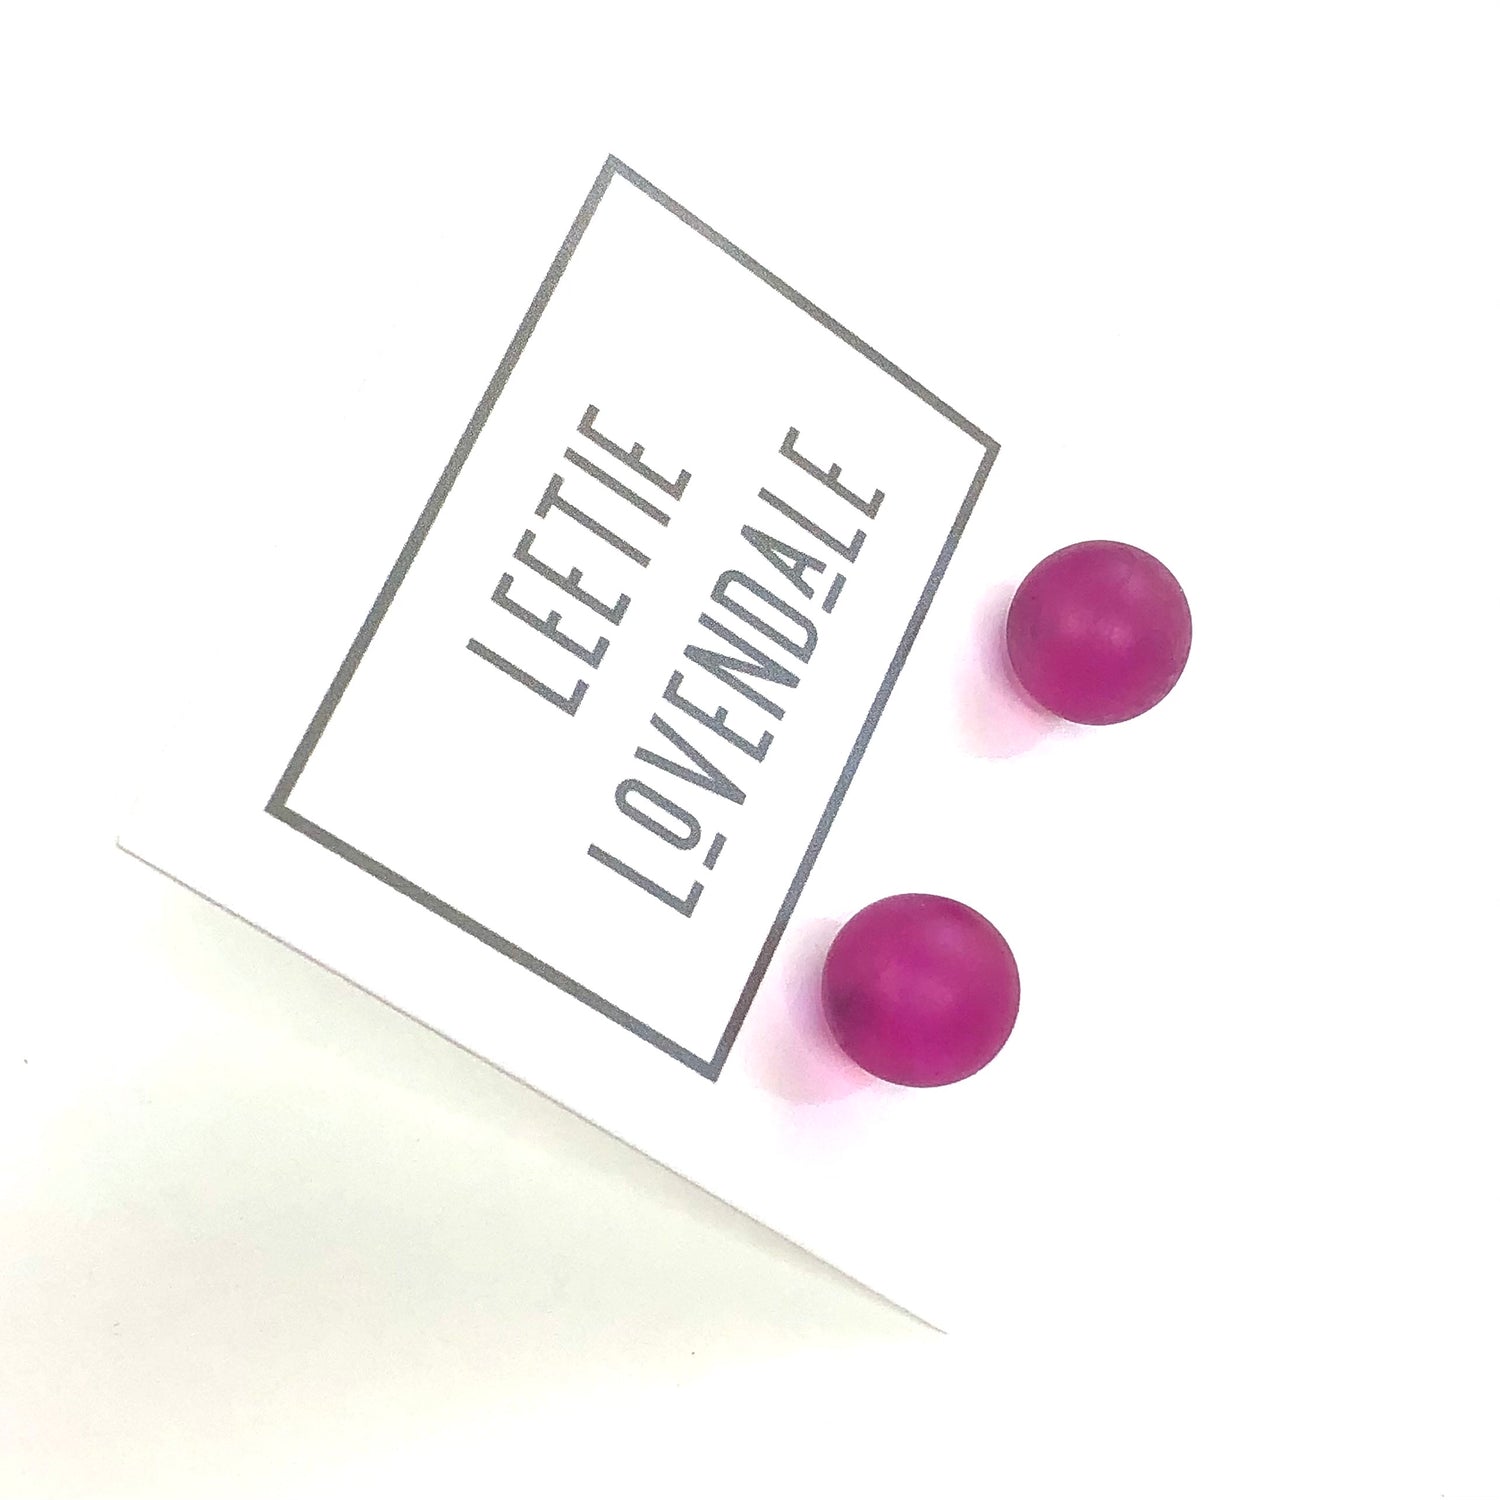 Hot Pink Frosted Lucite Ball Stud Earrings